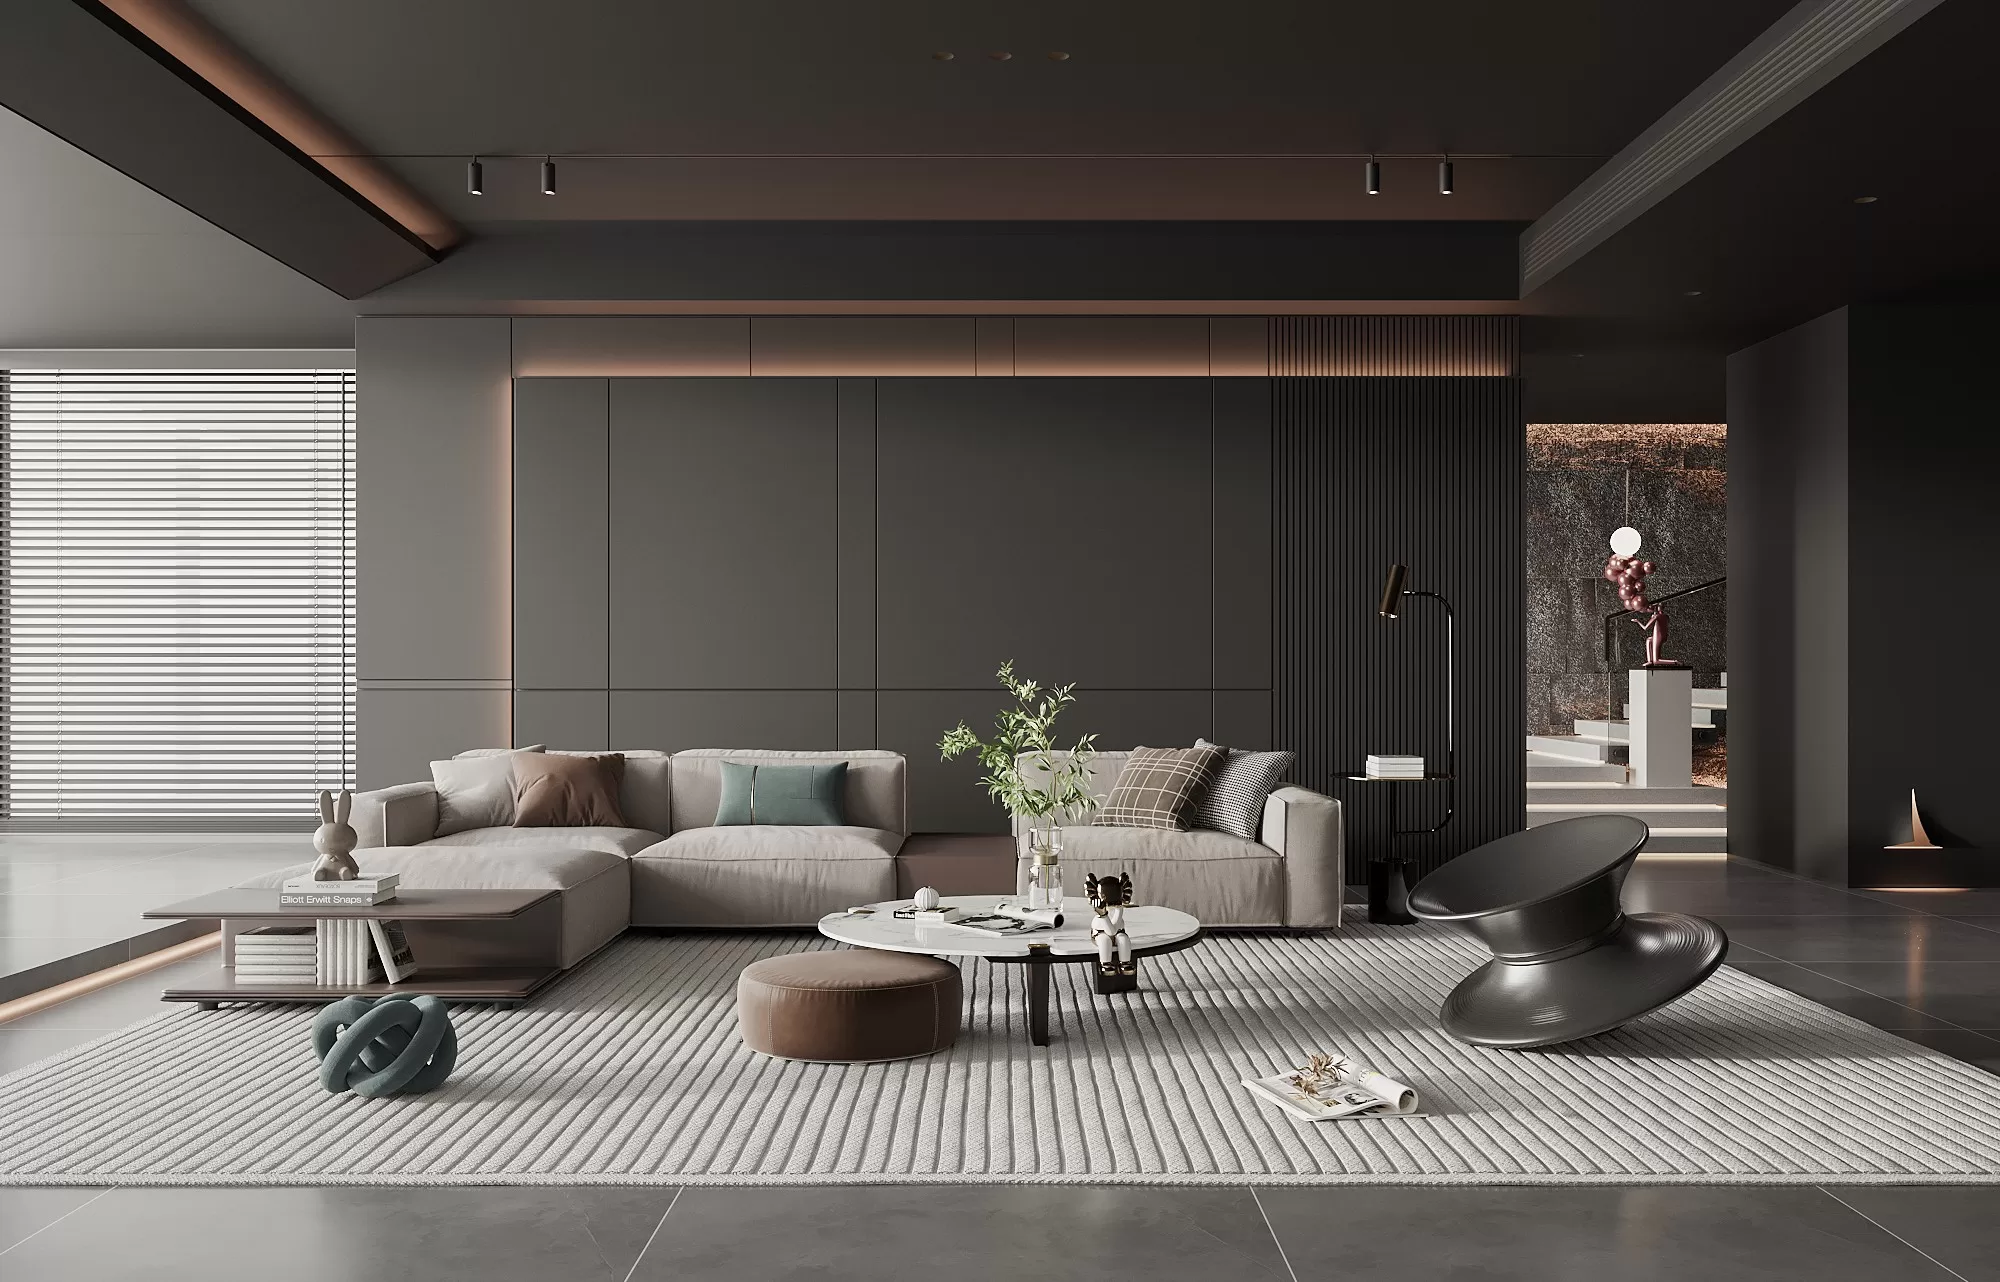 HOUSE SPACE 3D SCENES – LIVING ROOM – 0053